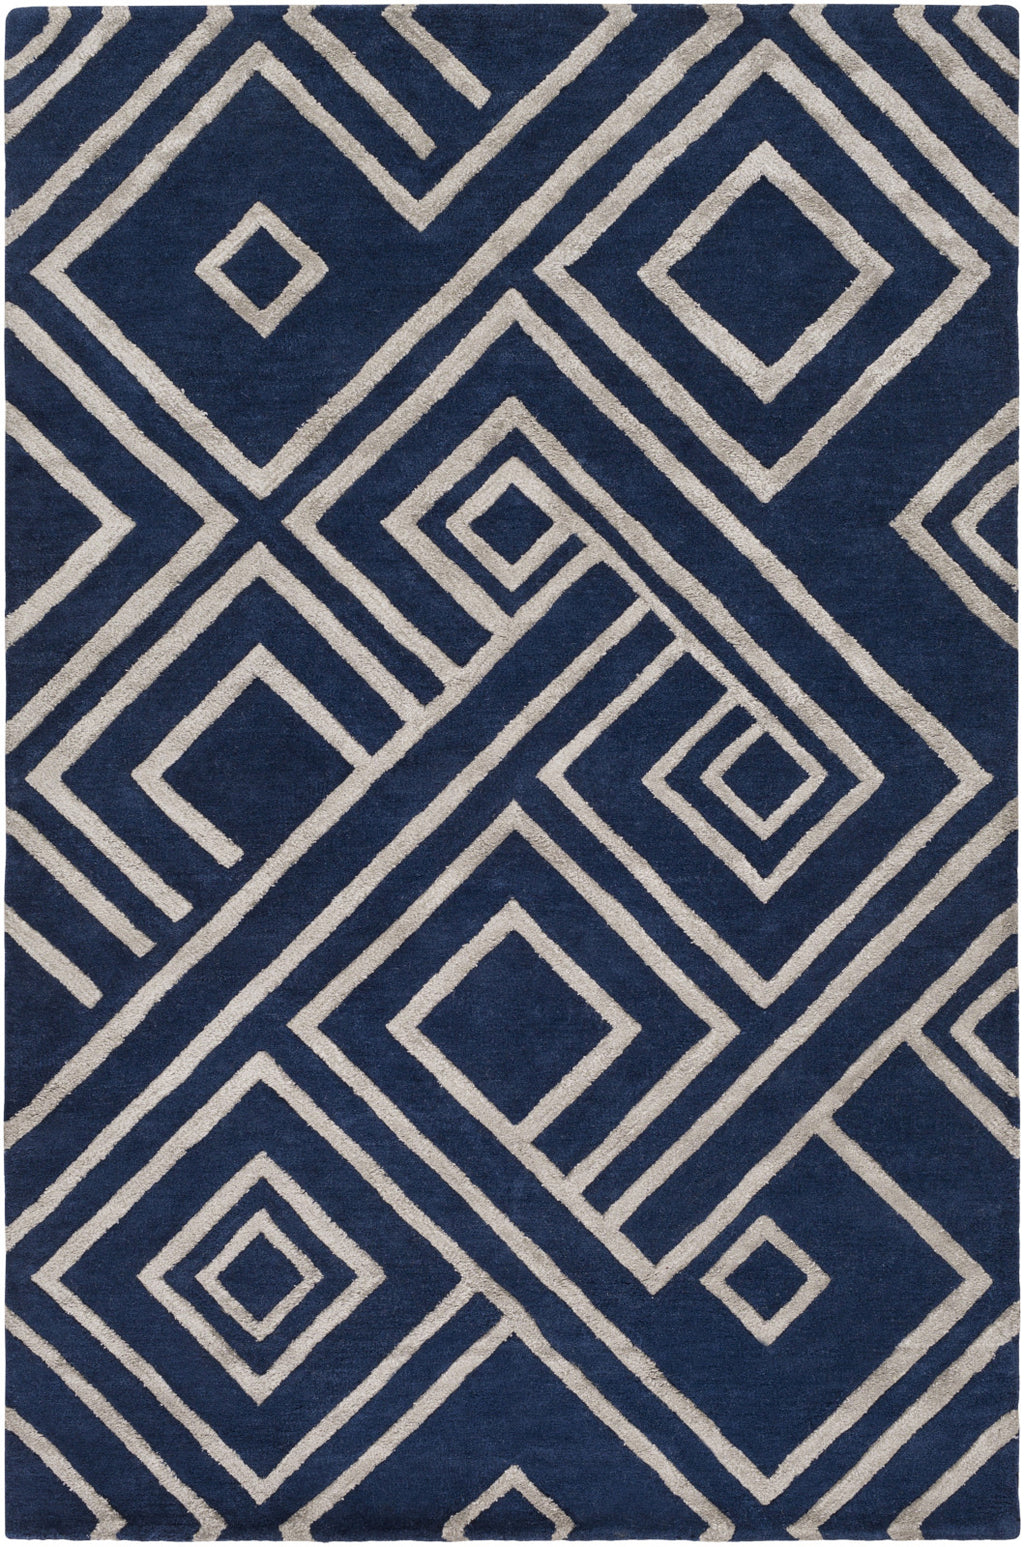 Chamber CHB-1010 Blue Hand Tufted Area Rug by Surya